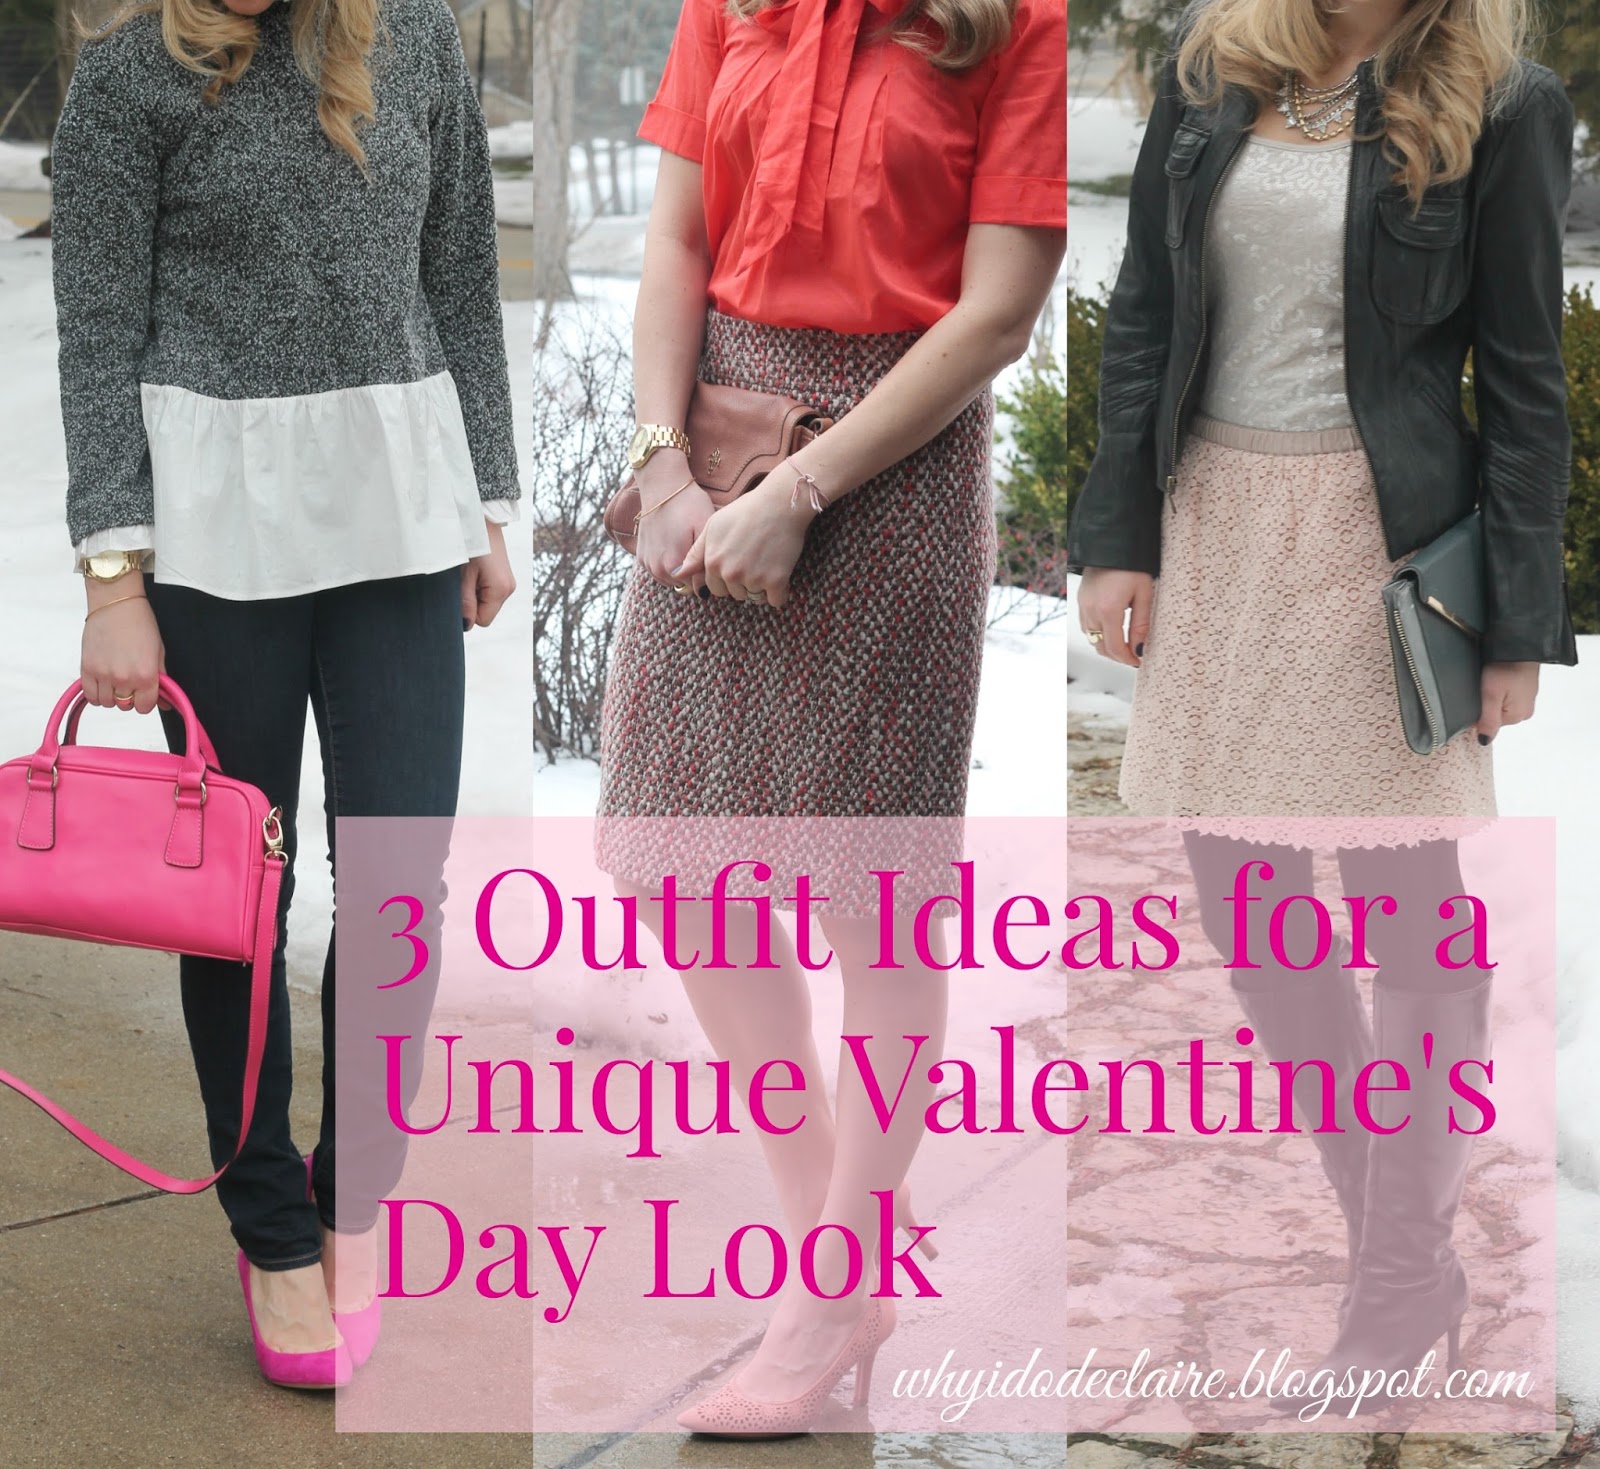 Confident Twosday: 3 Outfit Ideas for a Unique Valentine's Day Look